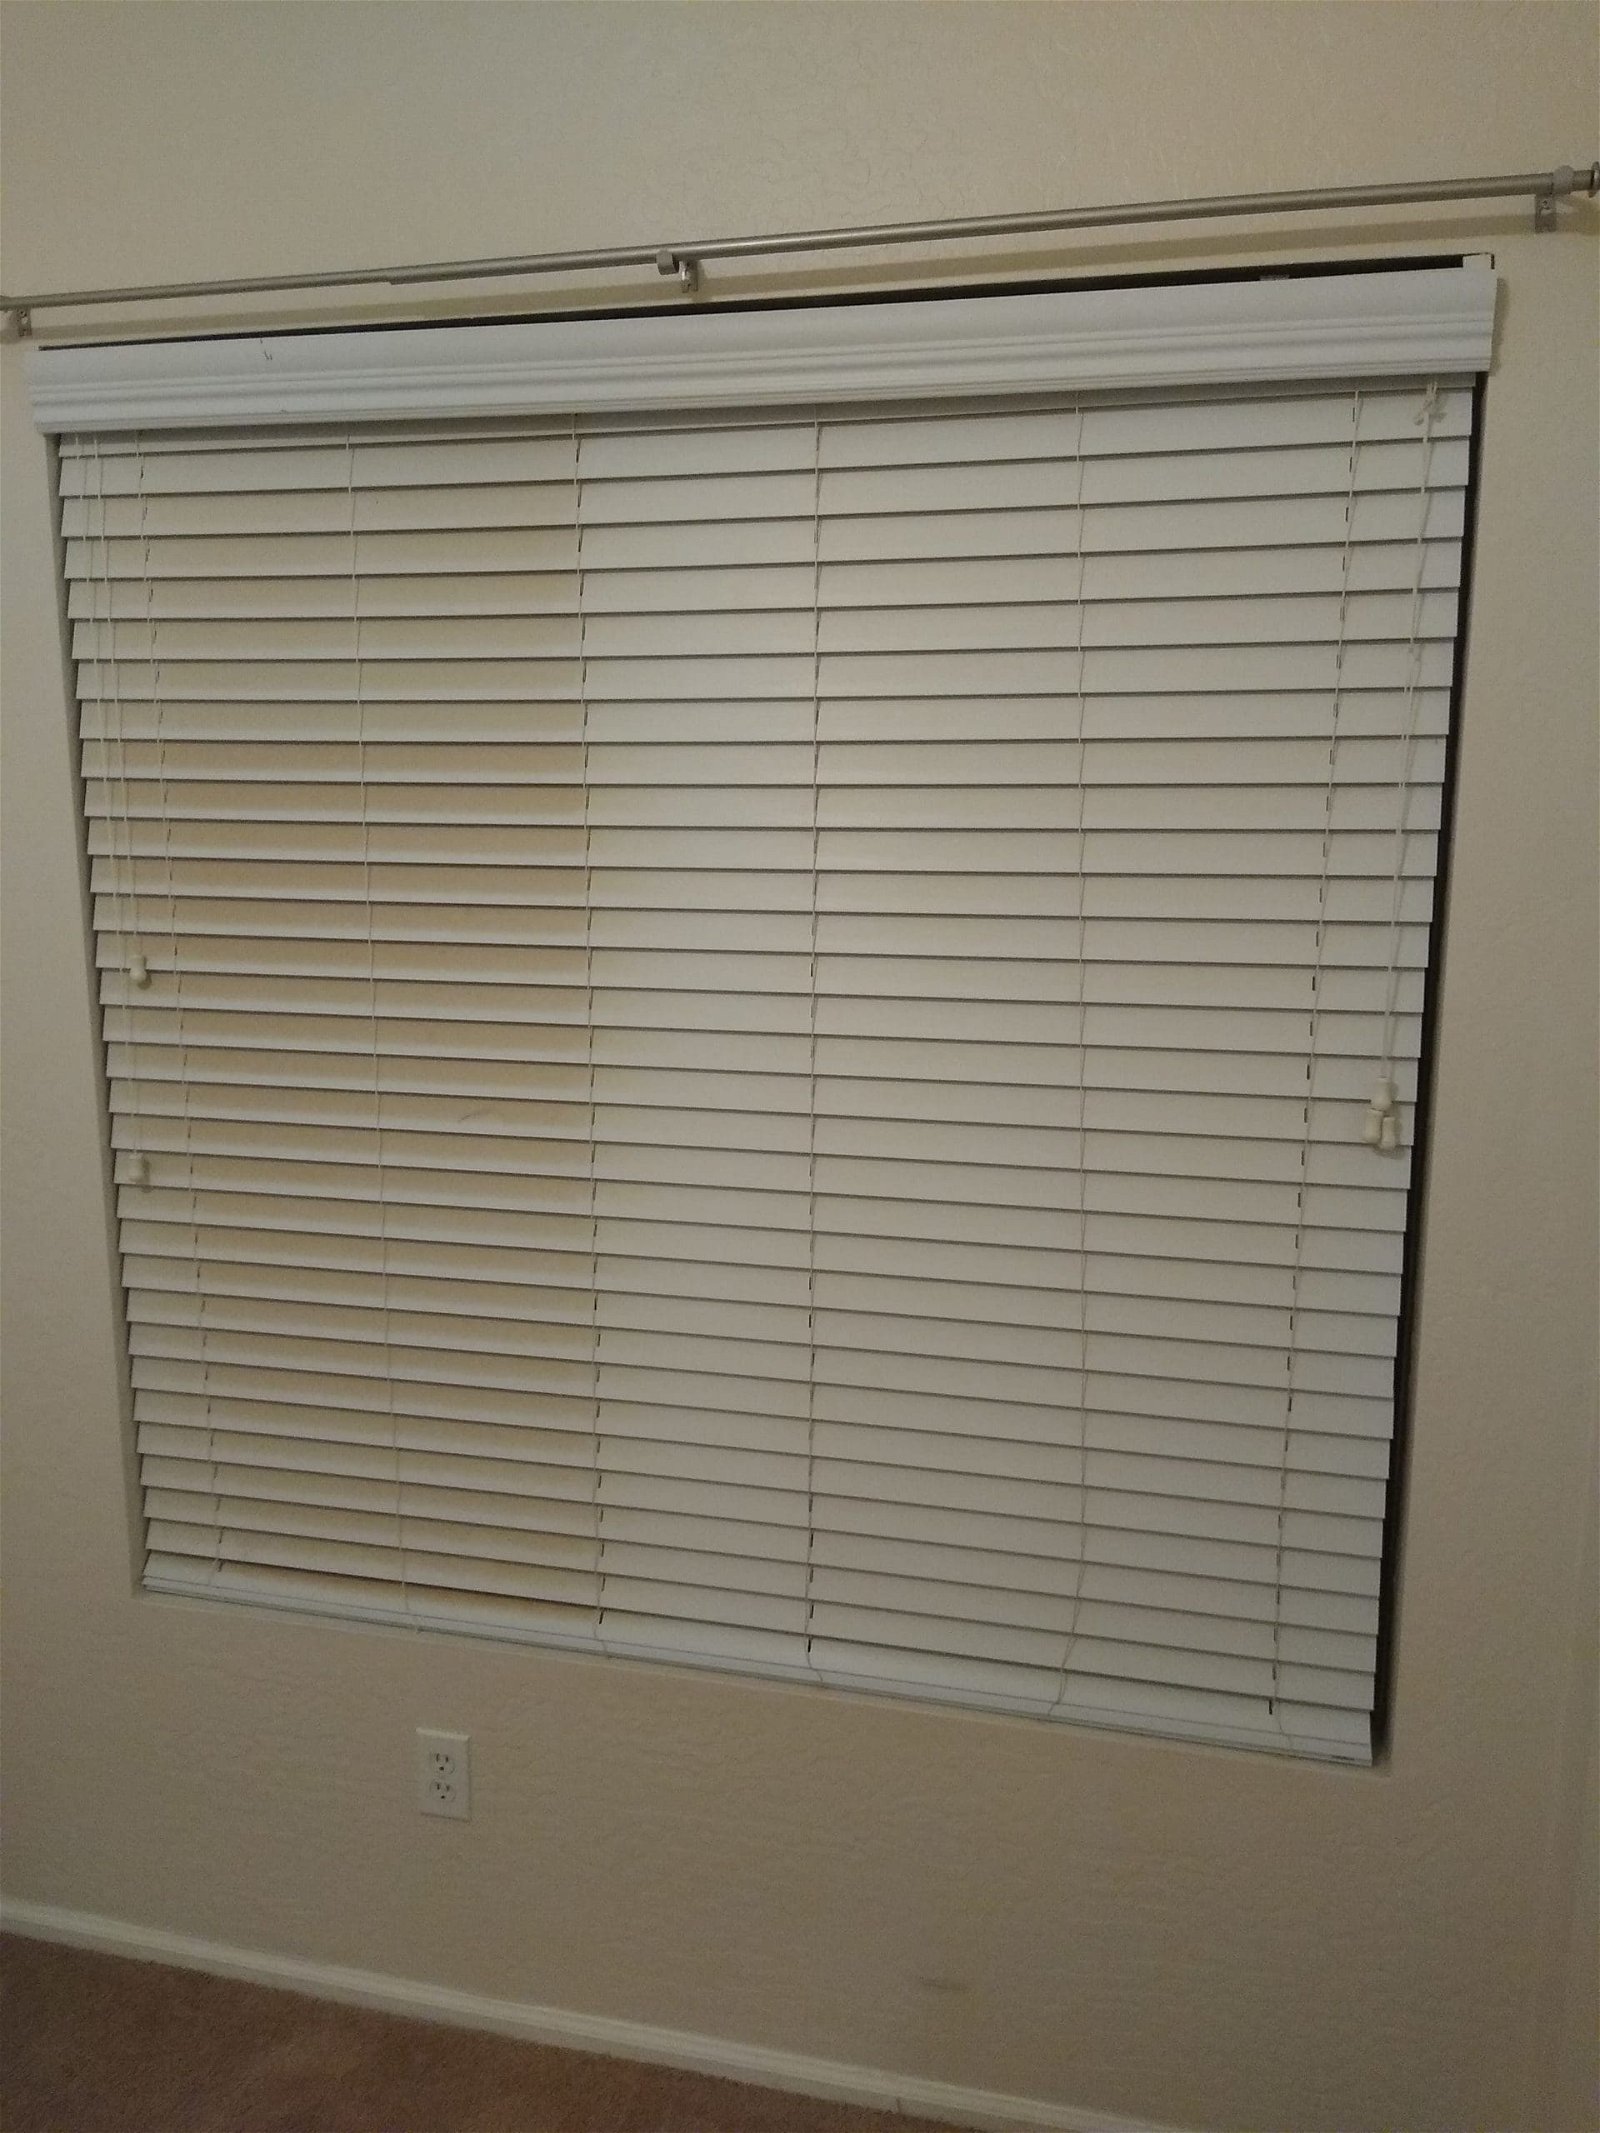 Before and after cleaned window blinds